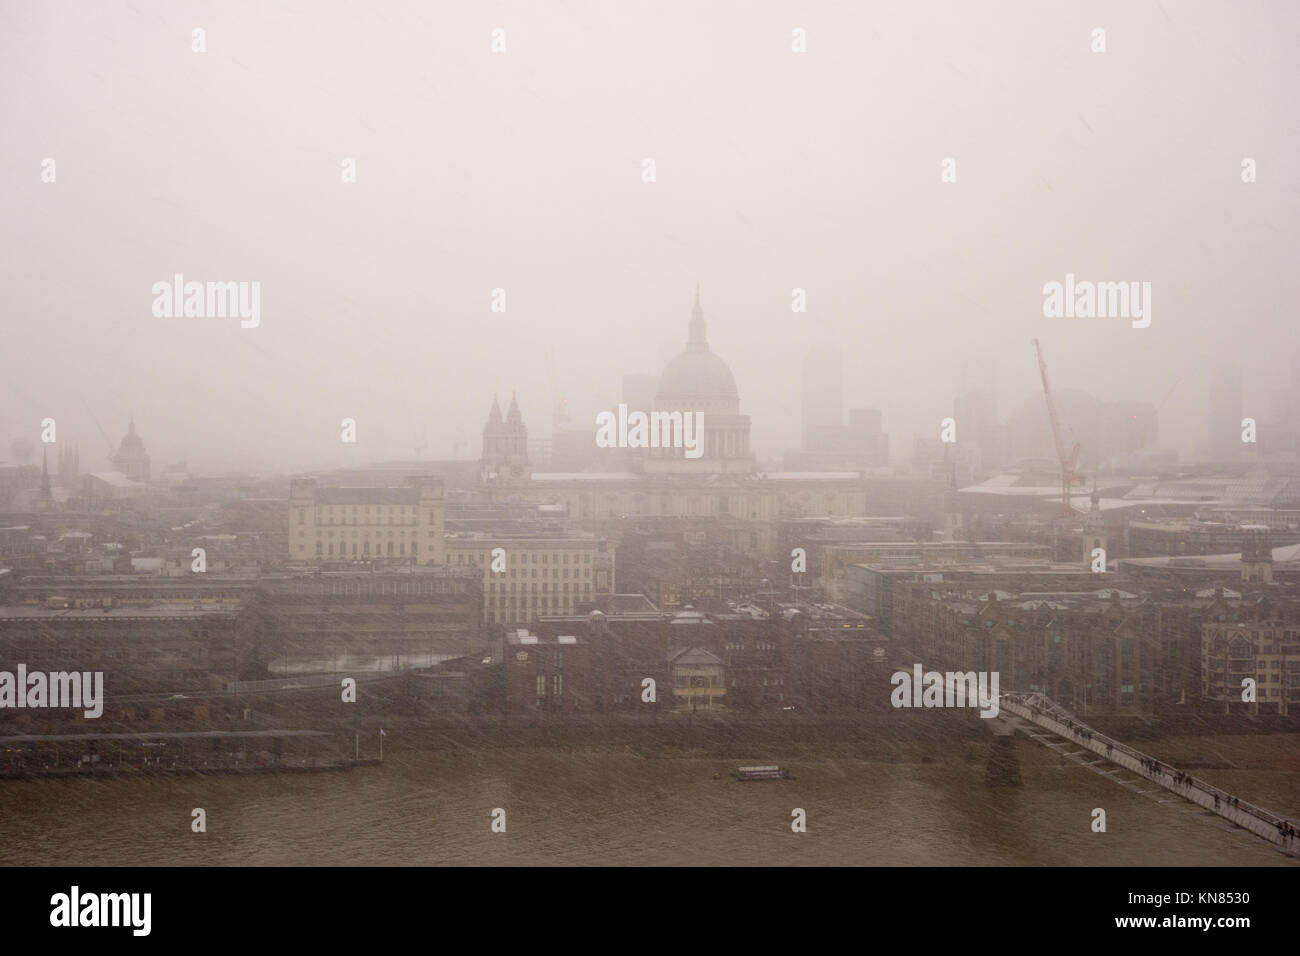 LONDON, UK. 10th Dec, 2017. Heavy snow falls across the City of London can be seen from the Viewing Level at Tate Modern. Credit: Fawcitt/Alamy Live News. Stock Photo